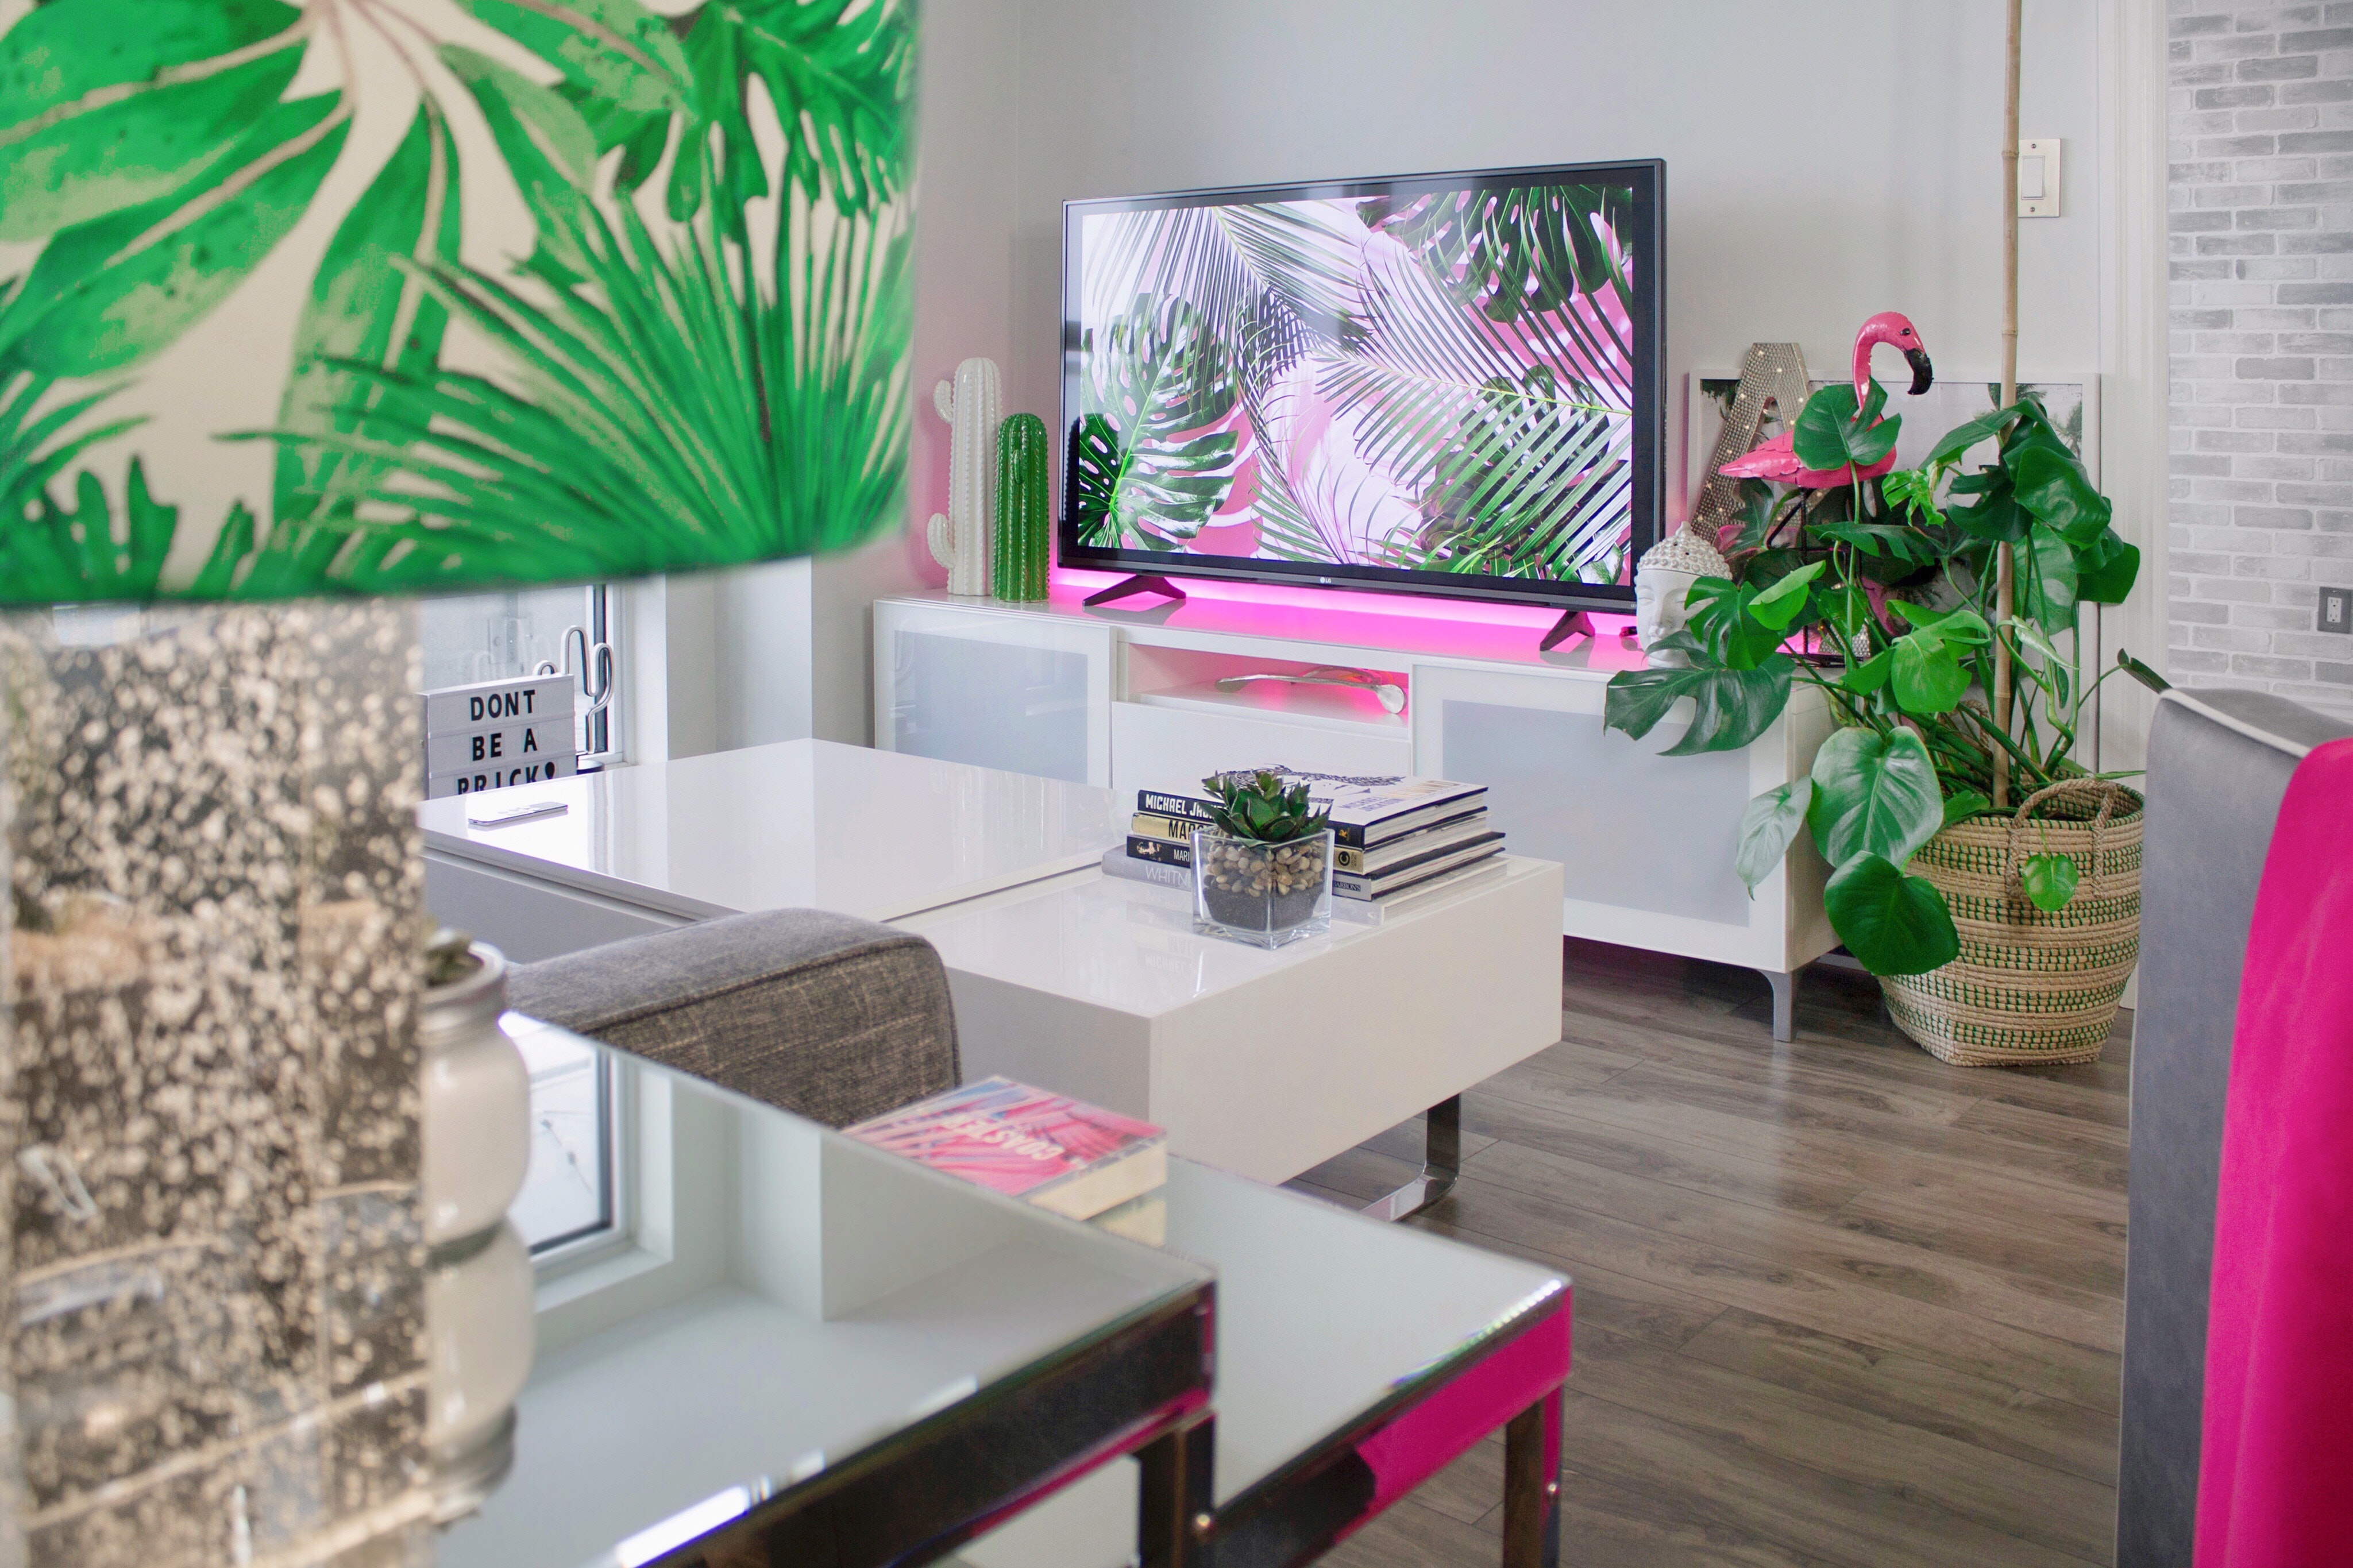 A smart television set in a pink-themed living room